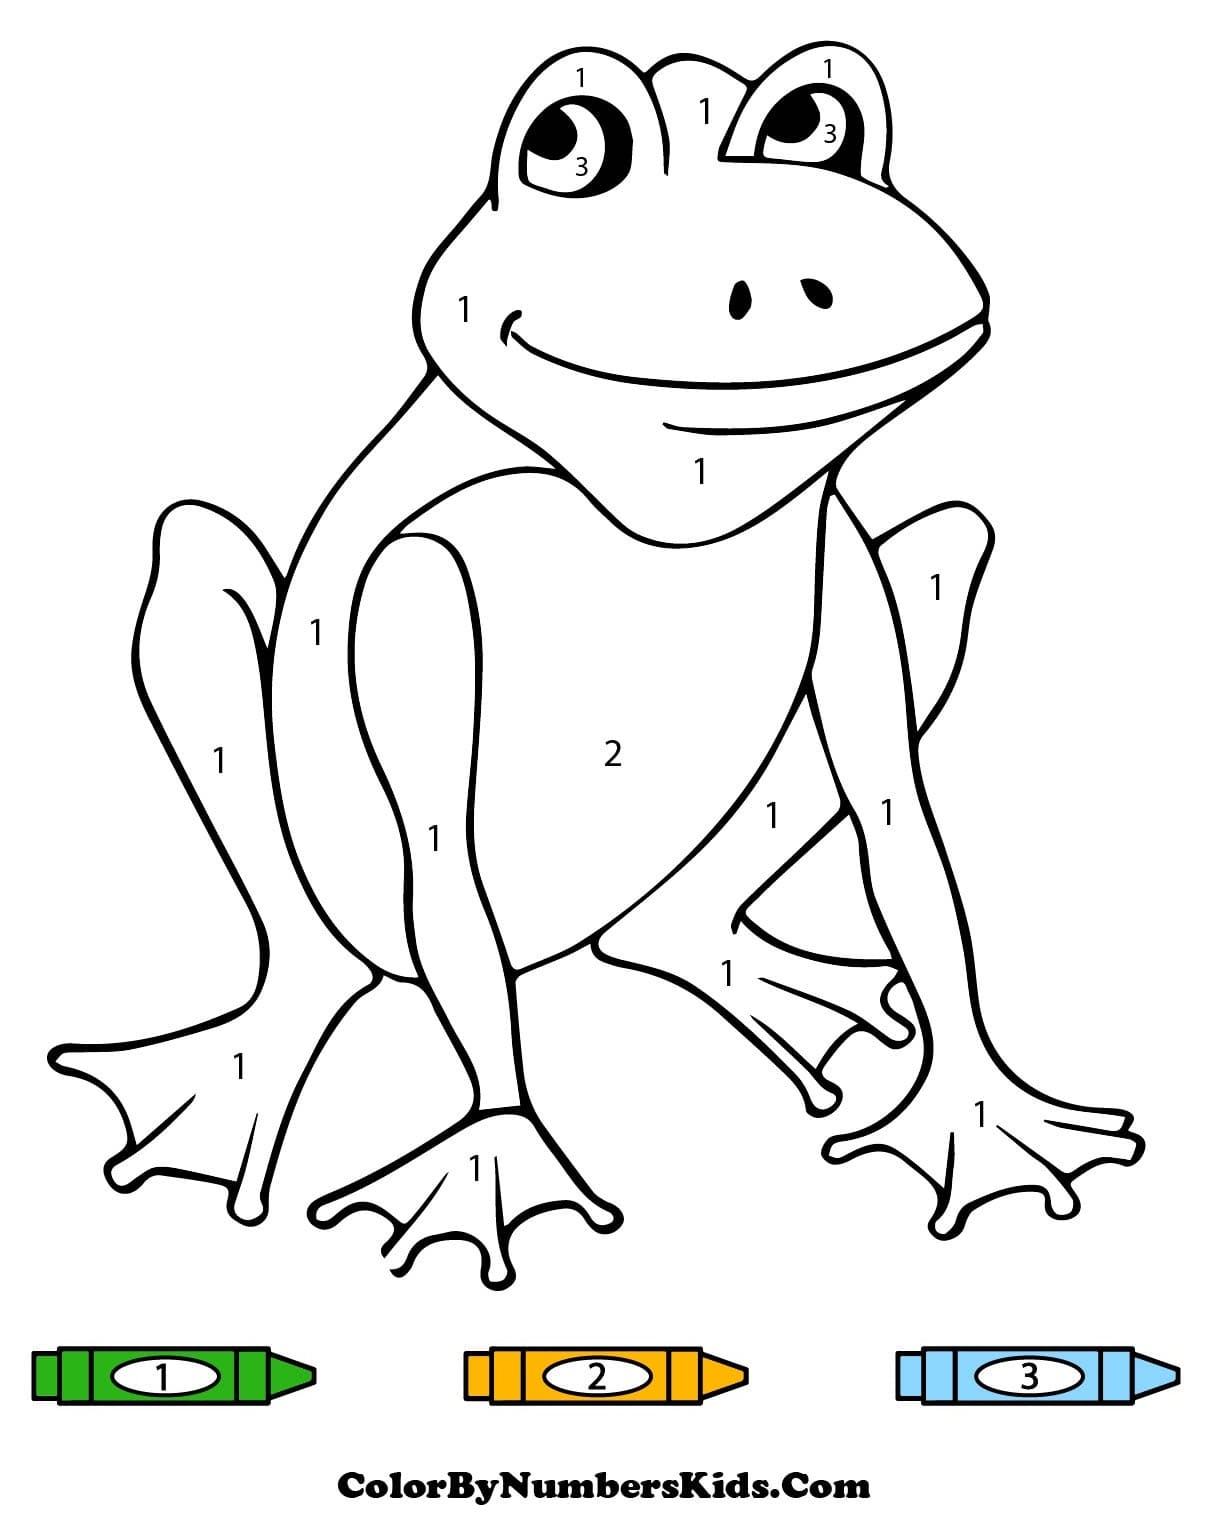 Frog Color By Number For Kids